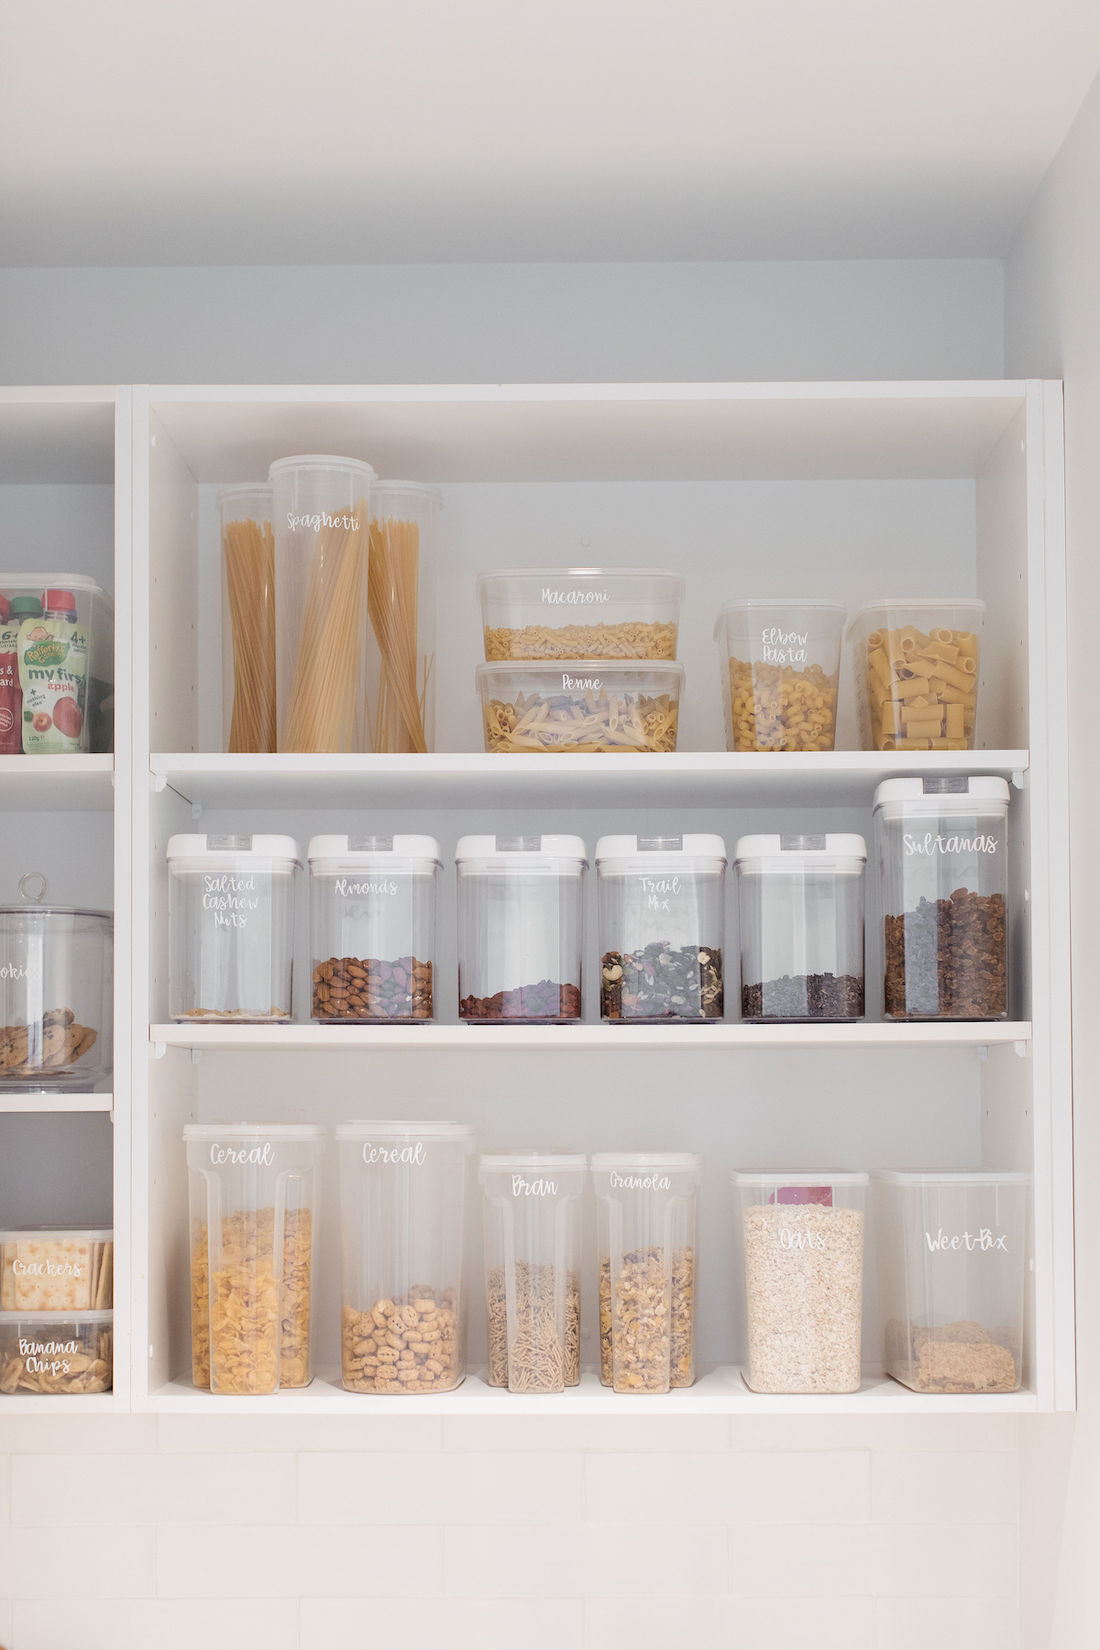 Containers style and organise your pantry